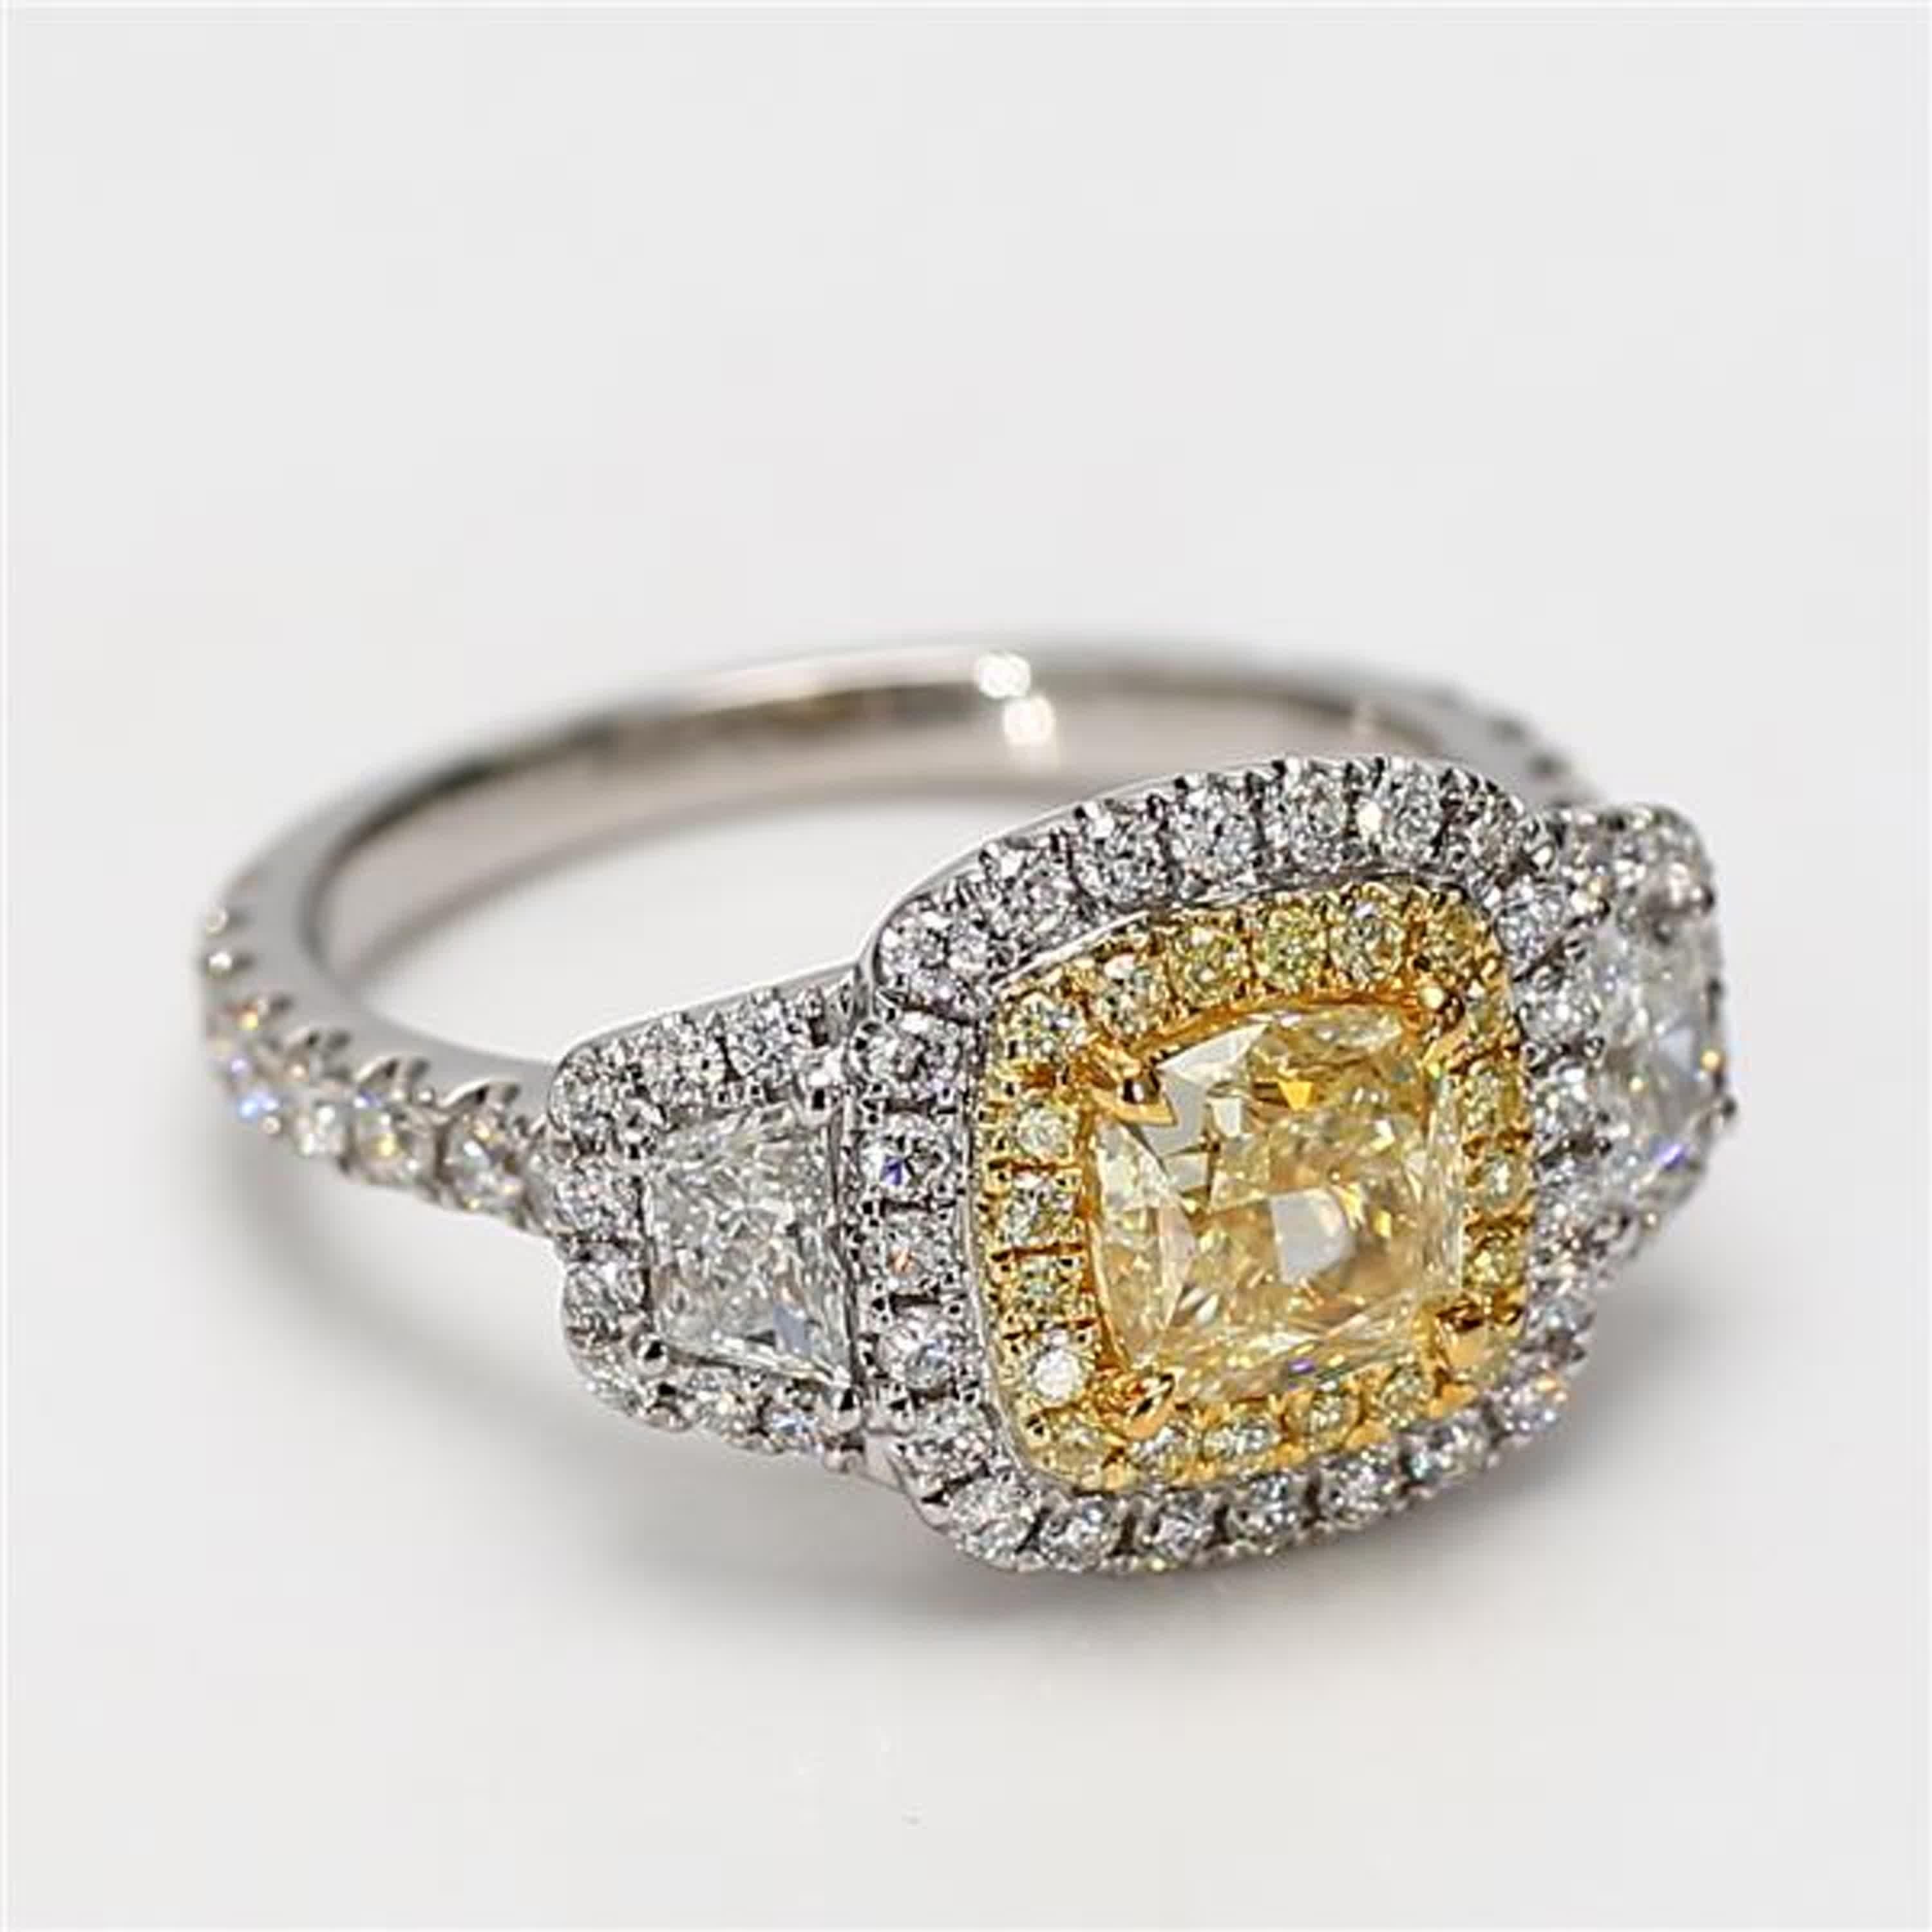 GIA Certified Natural Yellow Cushion Diamond 2.21 Carat TW Gold Cocktail Ring For Sale 1